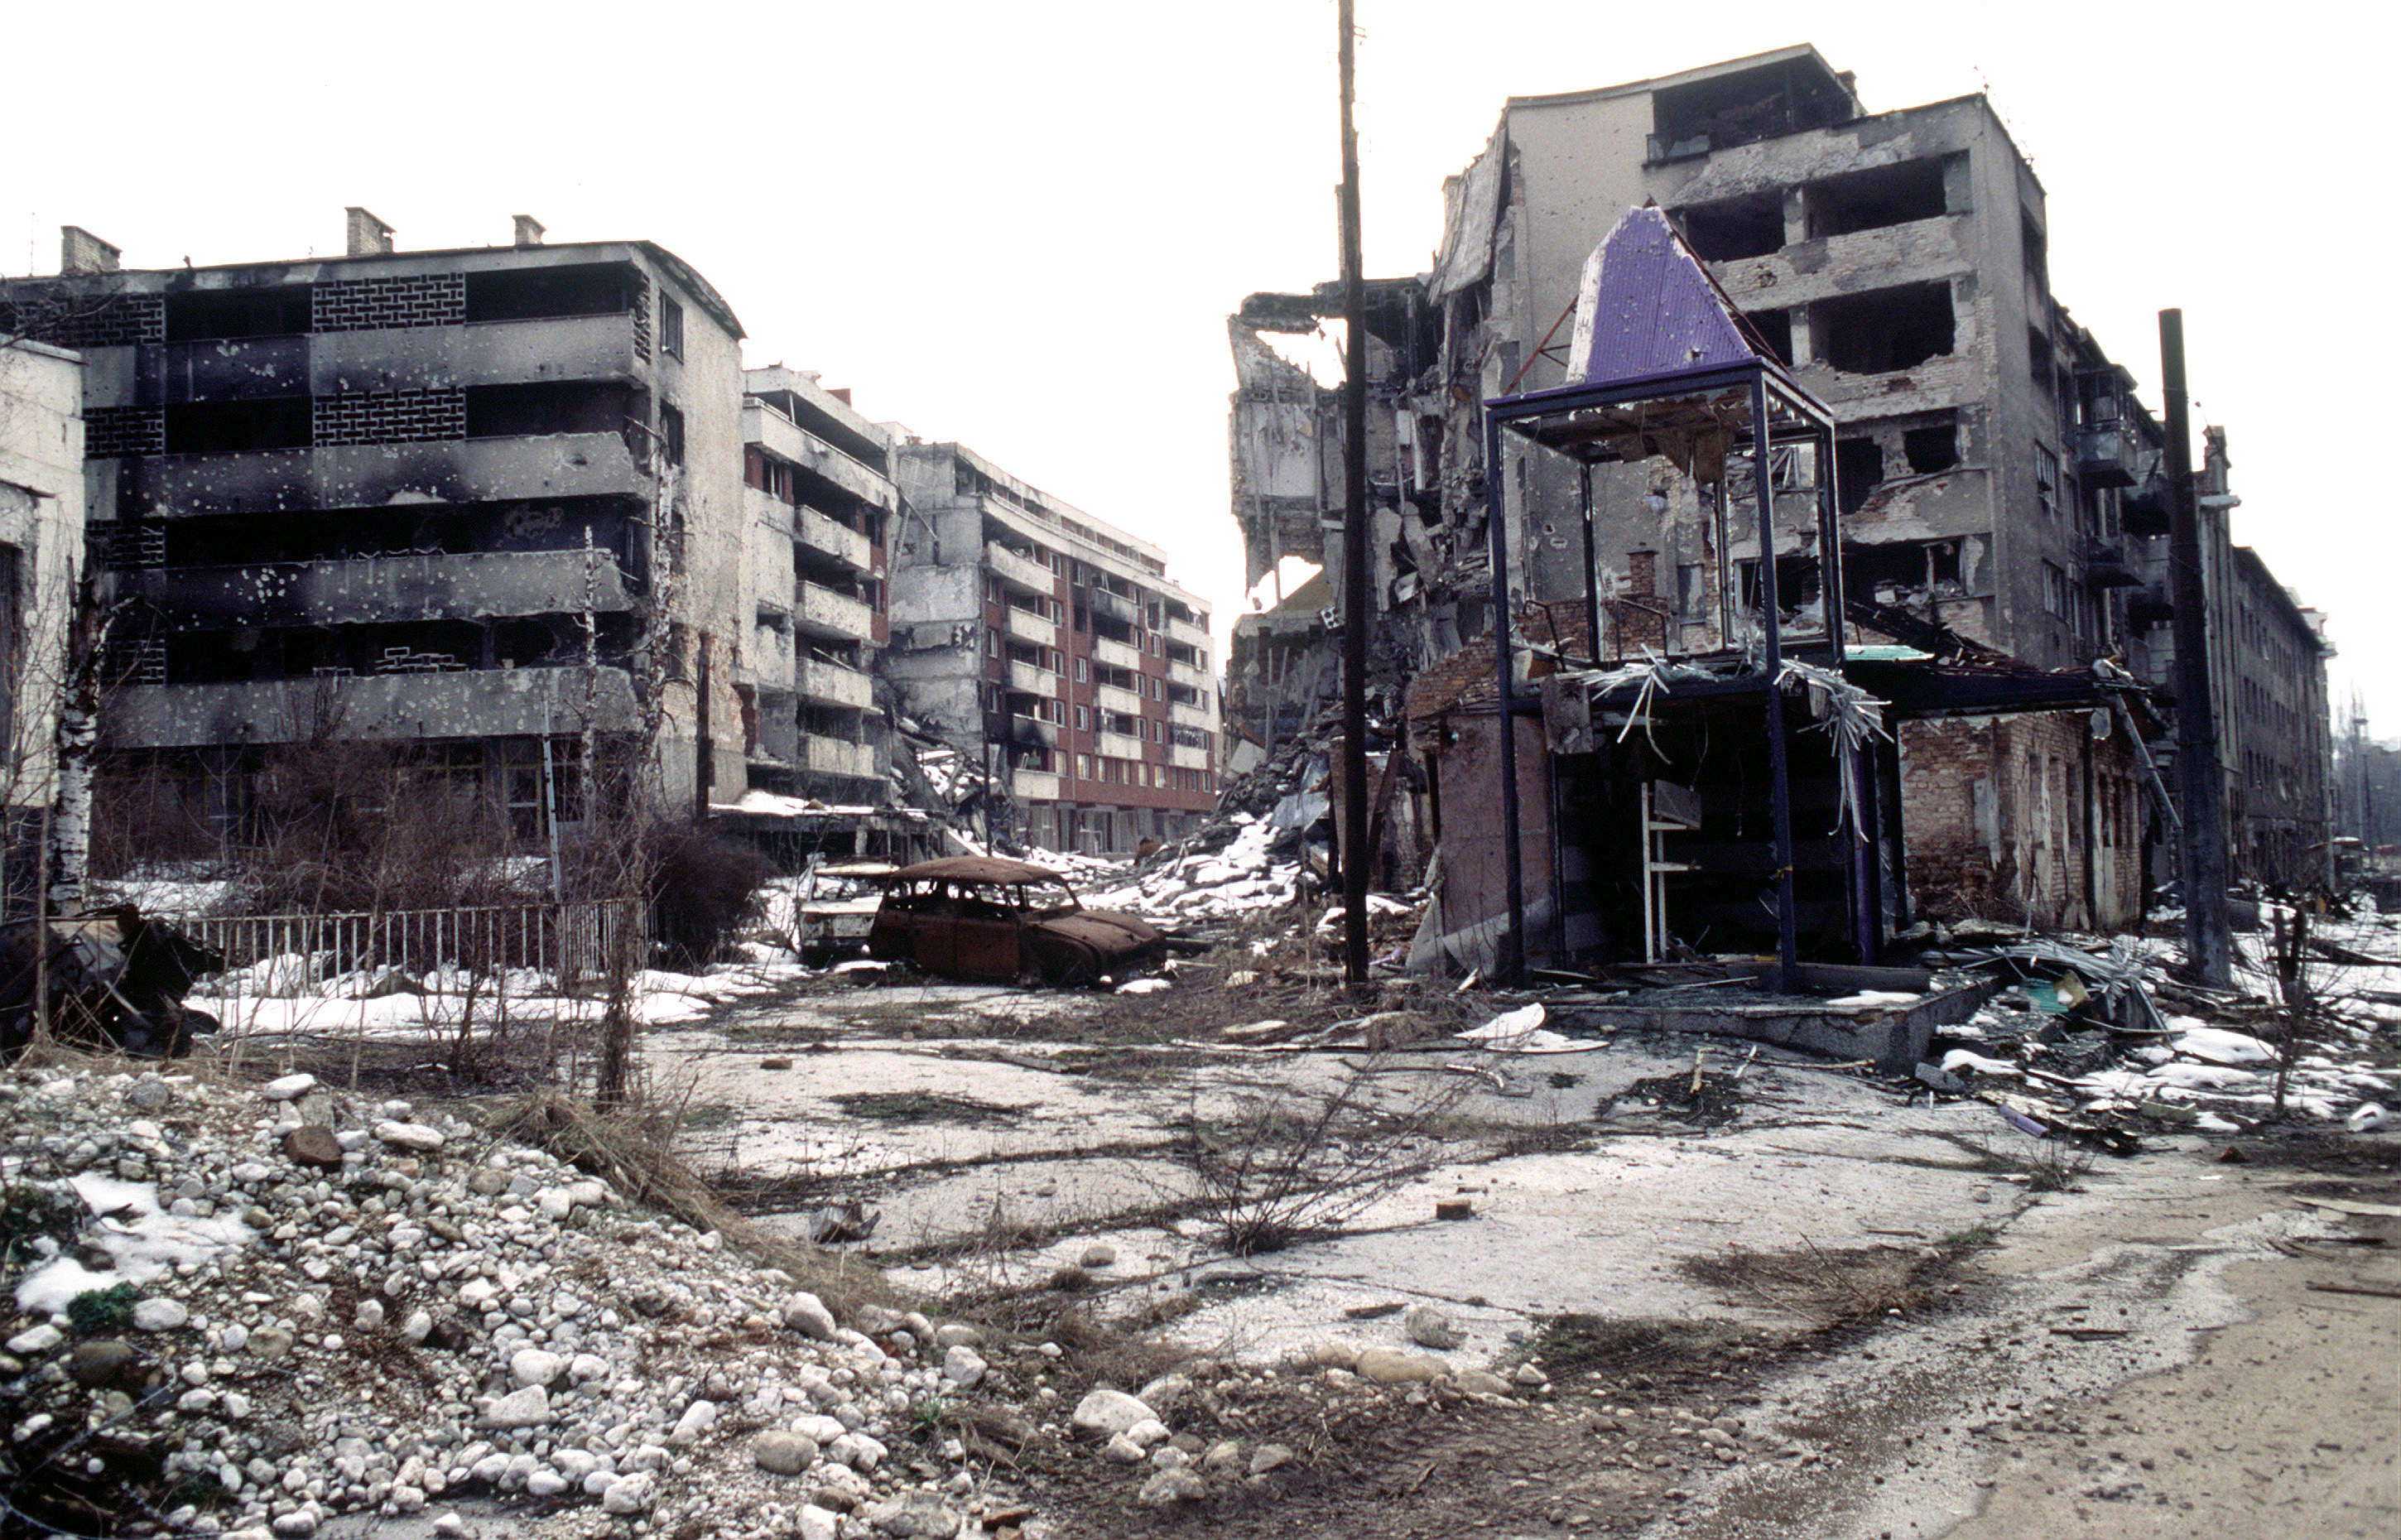 A suburb of Sarajevo in 1996, shortly after the war there officially ended. The decade of related conflicts known as the Yugoslav Wars left a trail of destruction across the region on all sides.